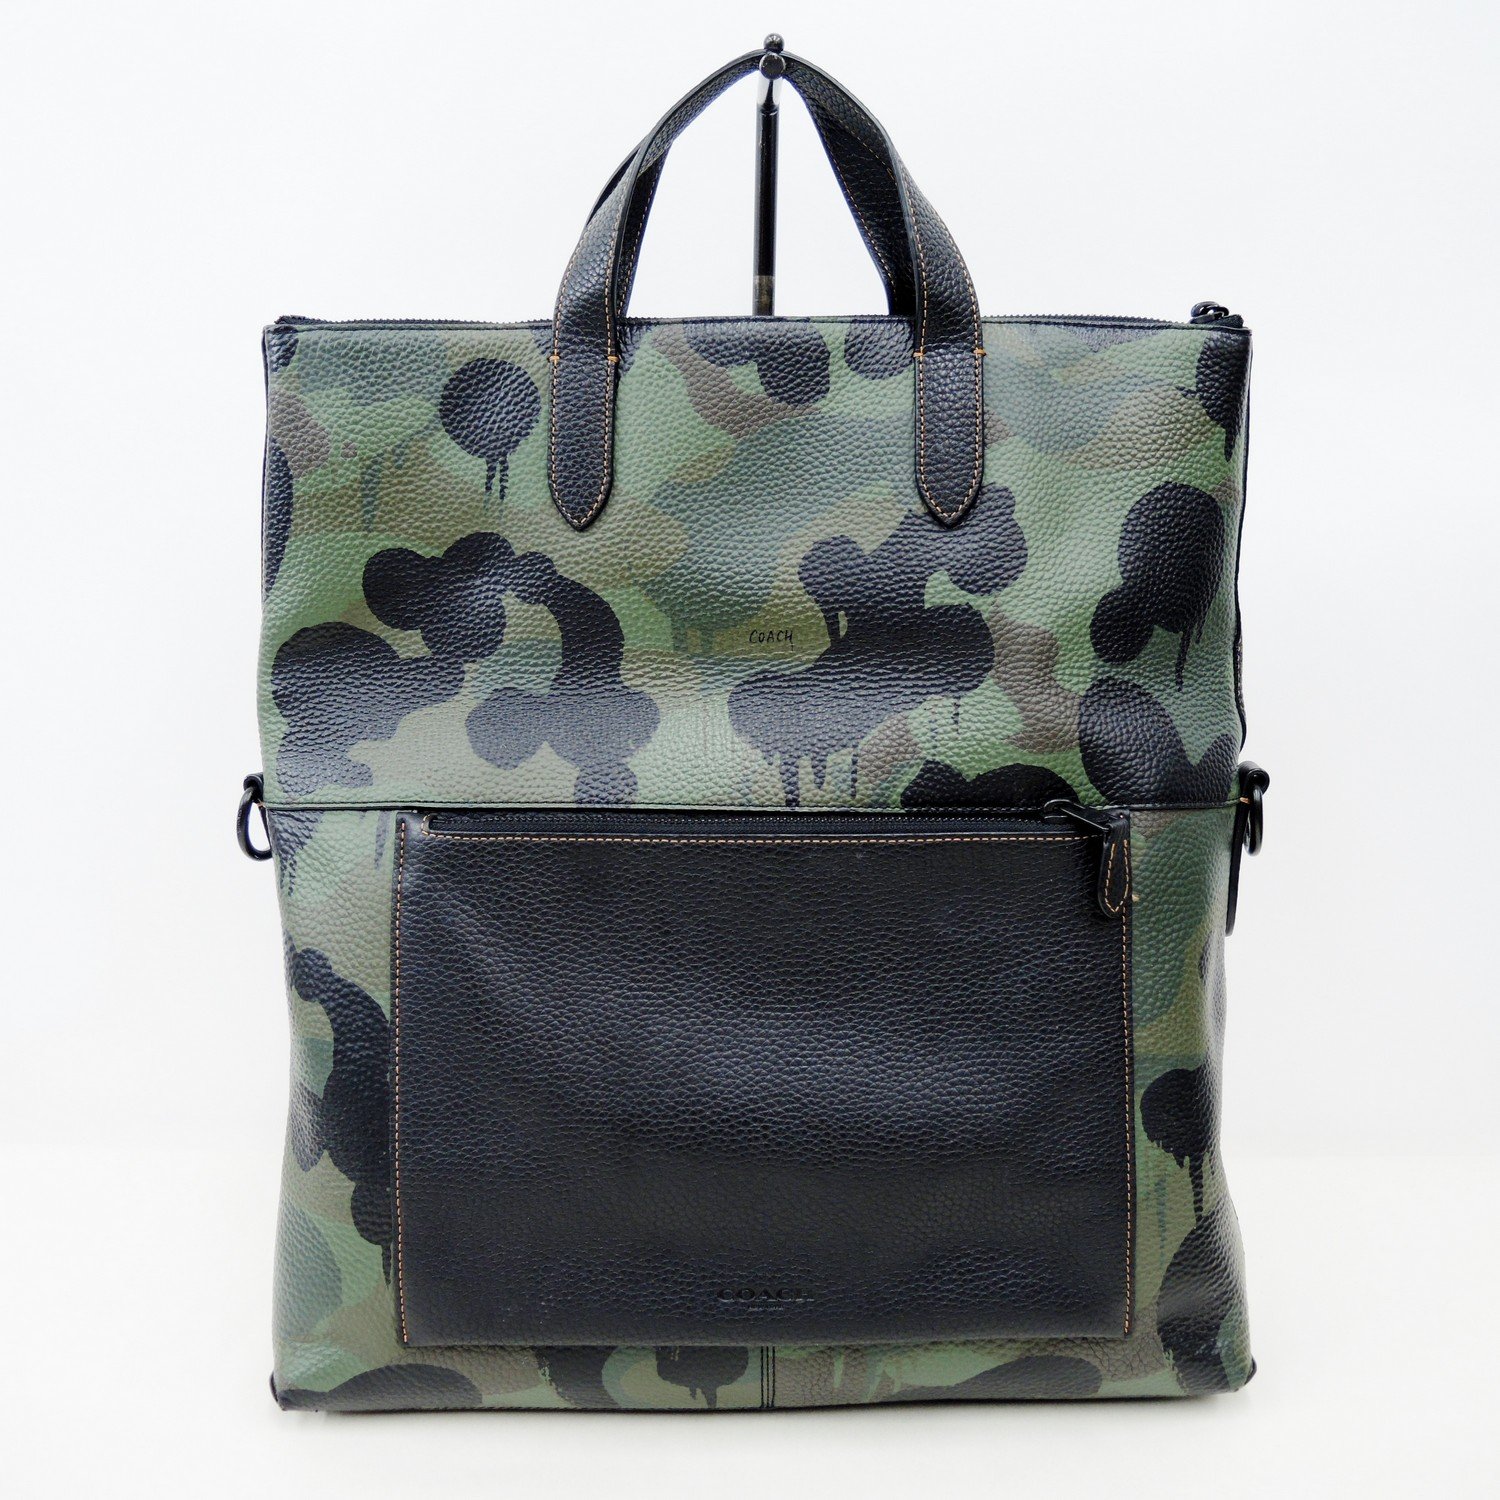 COACH Camo and Black 'Manhattan' Foldover Tote Bag — Seams to Fit Women's  Consignment